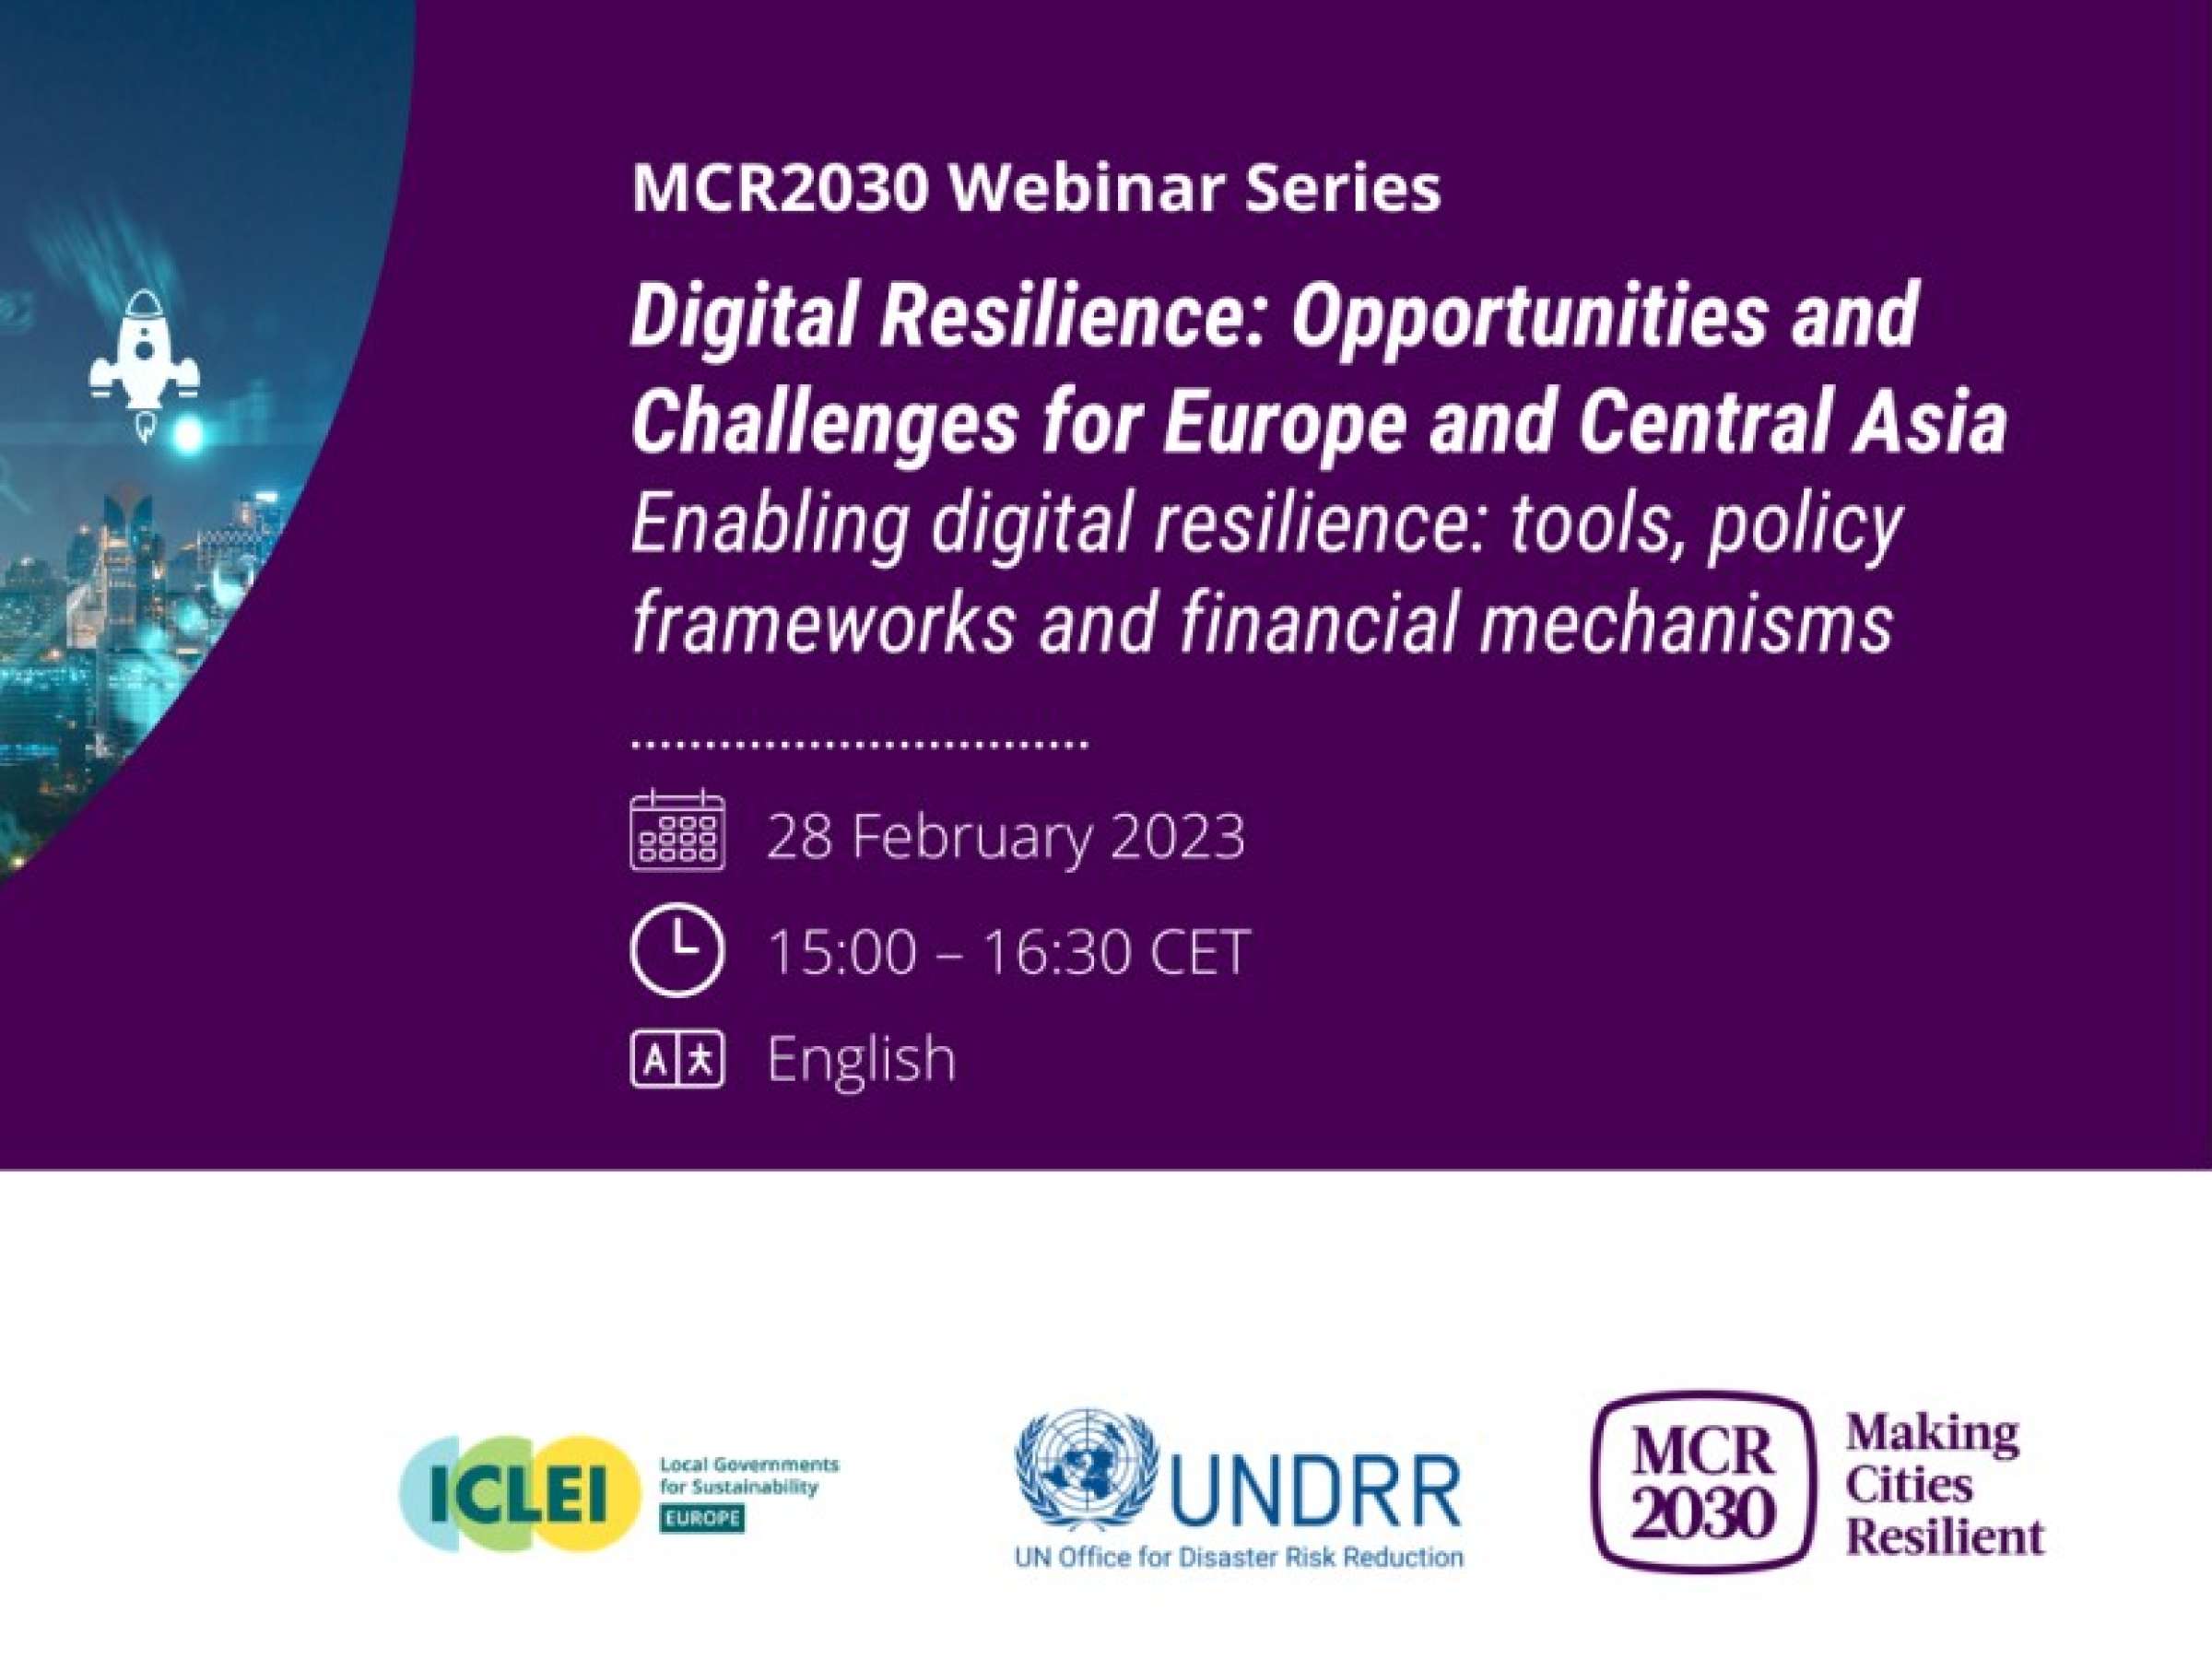 Enabling digital resilience: tools, policy frameworks and financial mechanisms